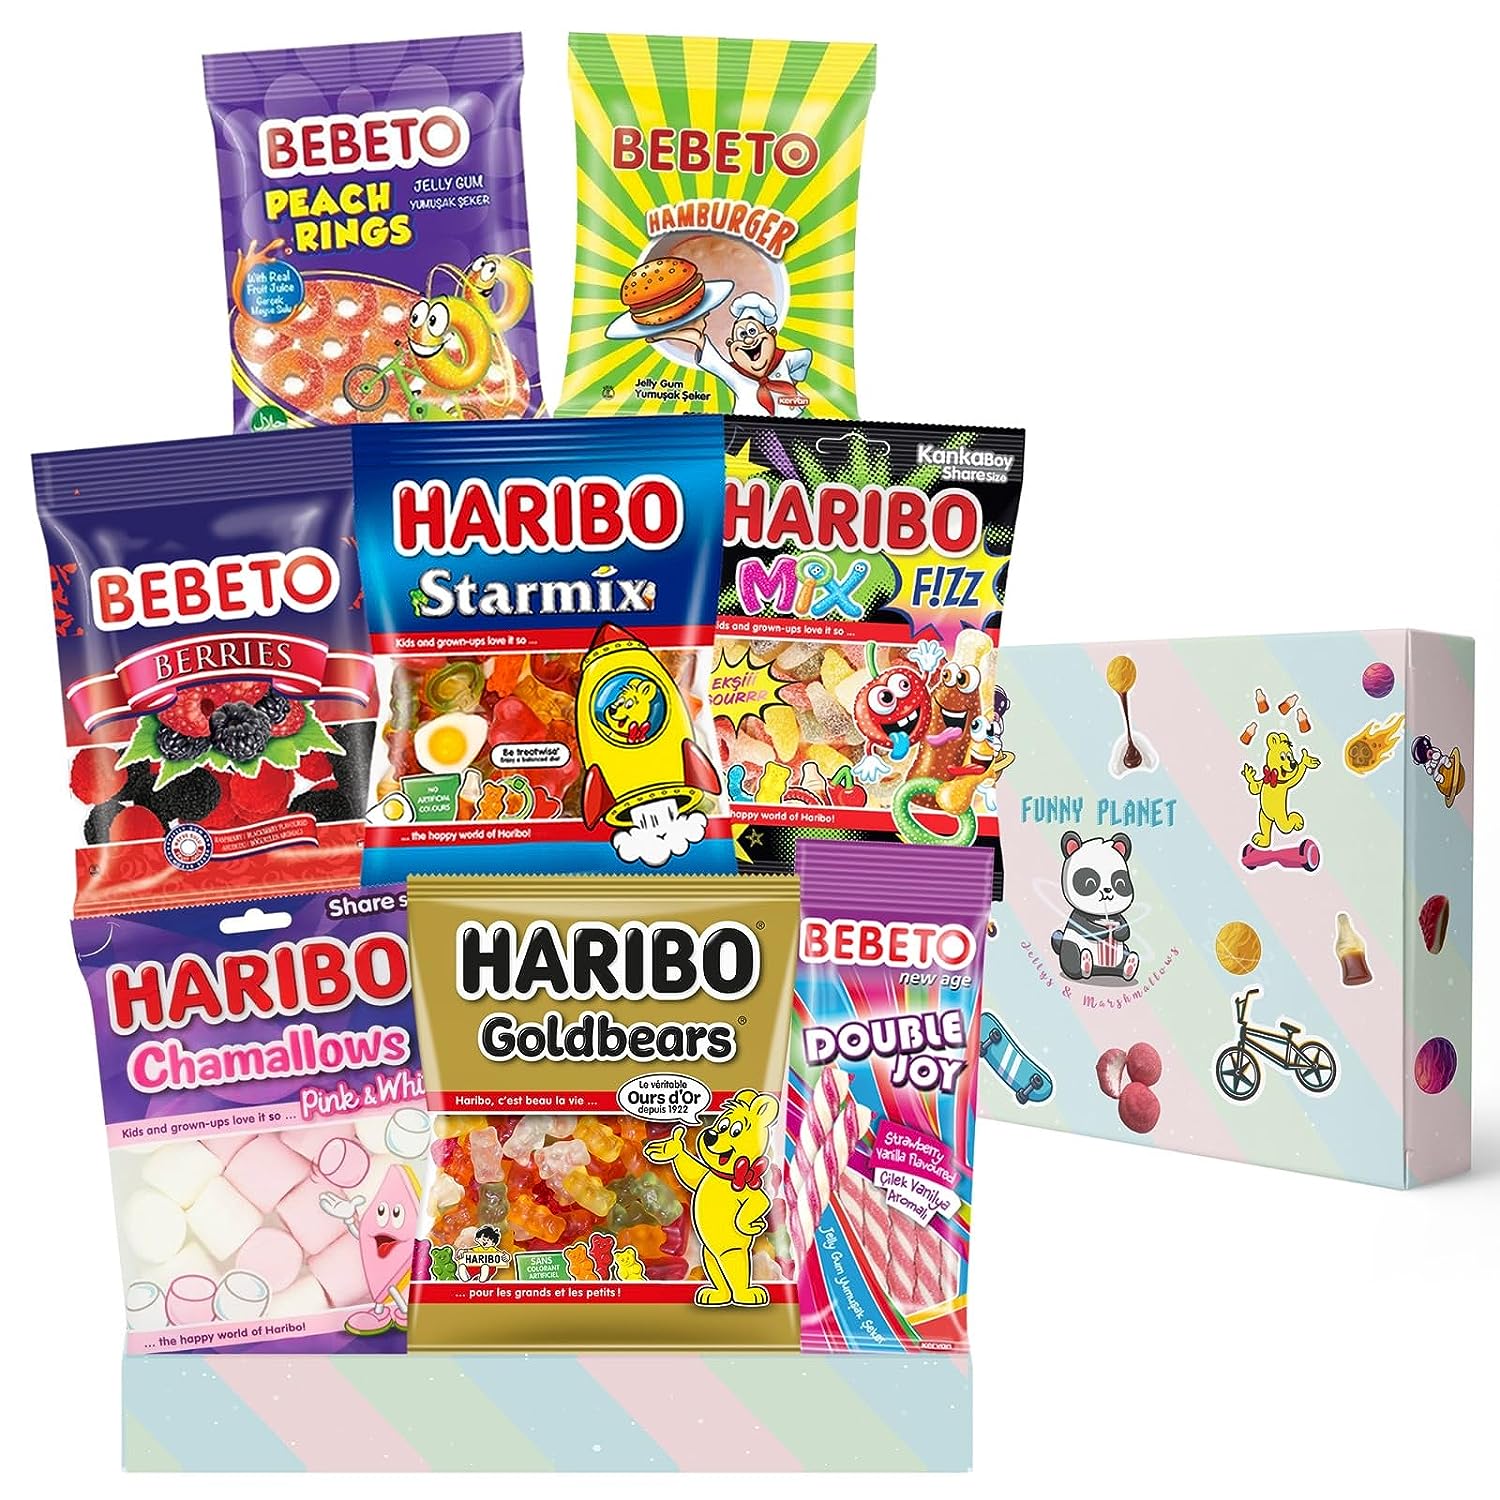 Haribo Friendship Rings from Carway's Candy | Carway's Candy